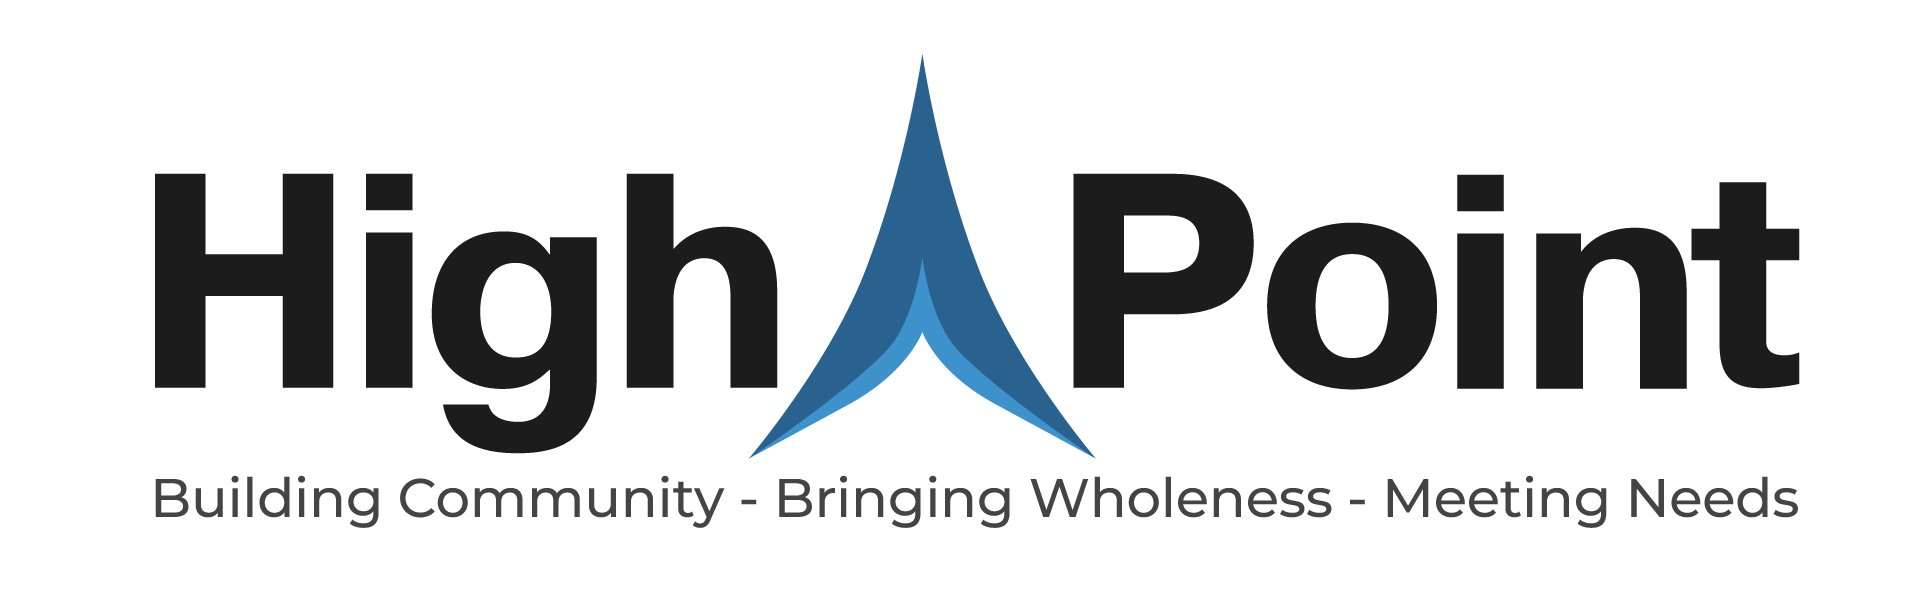 HighPoint Charitable Services logo